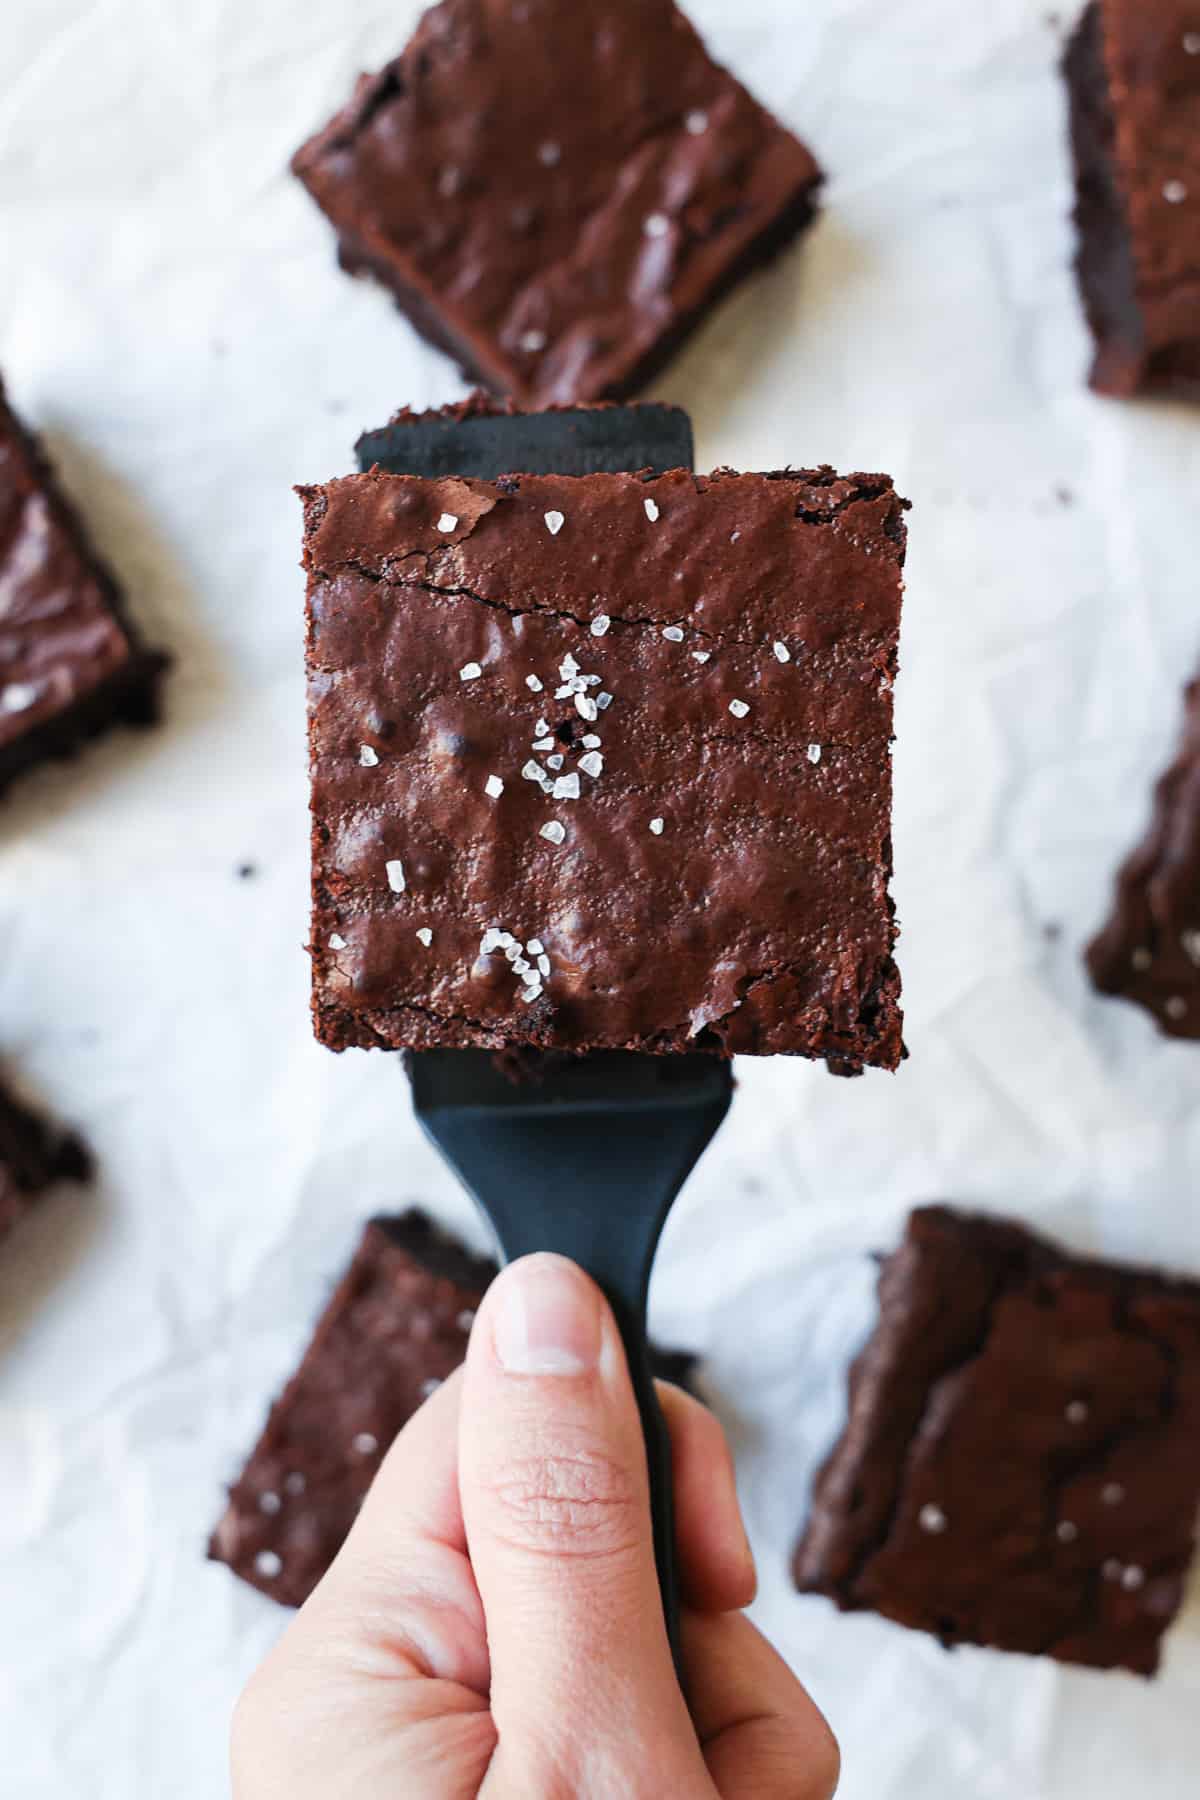 Dark chocolate brownies are a great dessert to go with spaghetti.